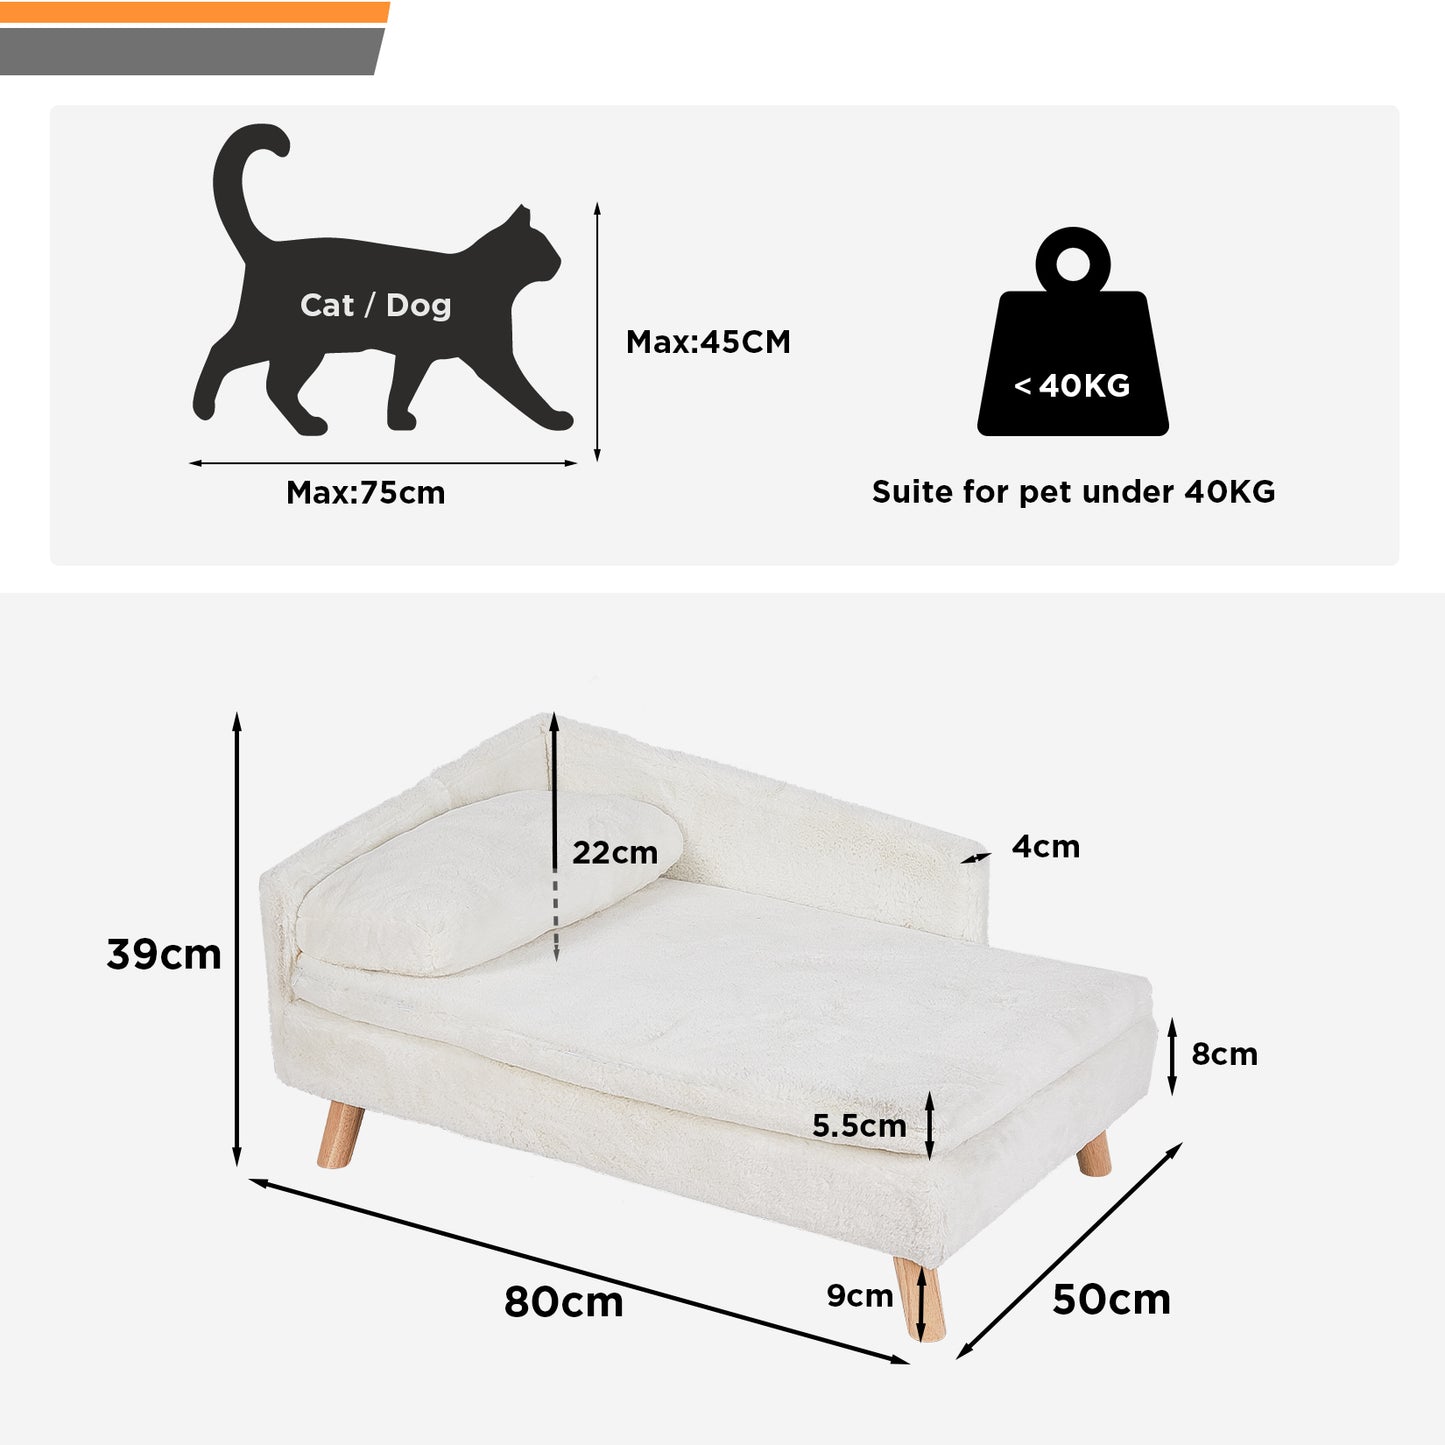 Great for cats/ small dogs to play, nap,lounge, rest, relax and feel at home. Easily move around the indoor outdoors as the package is not large.